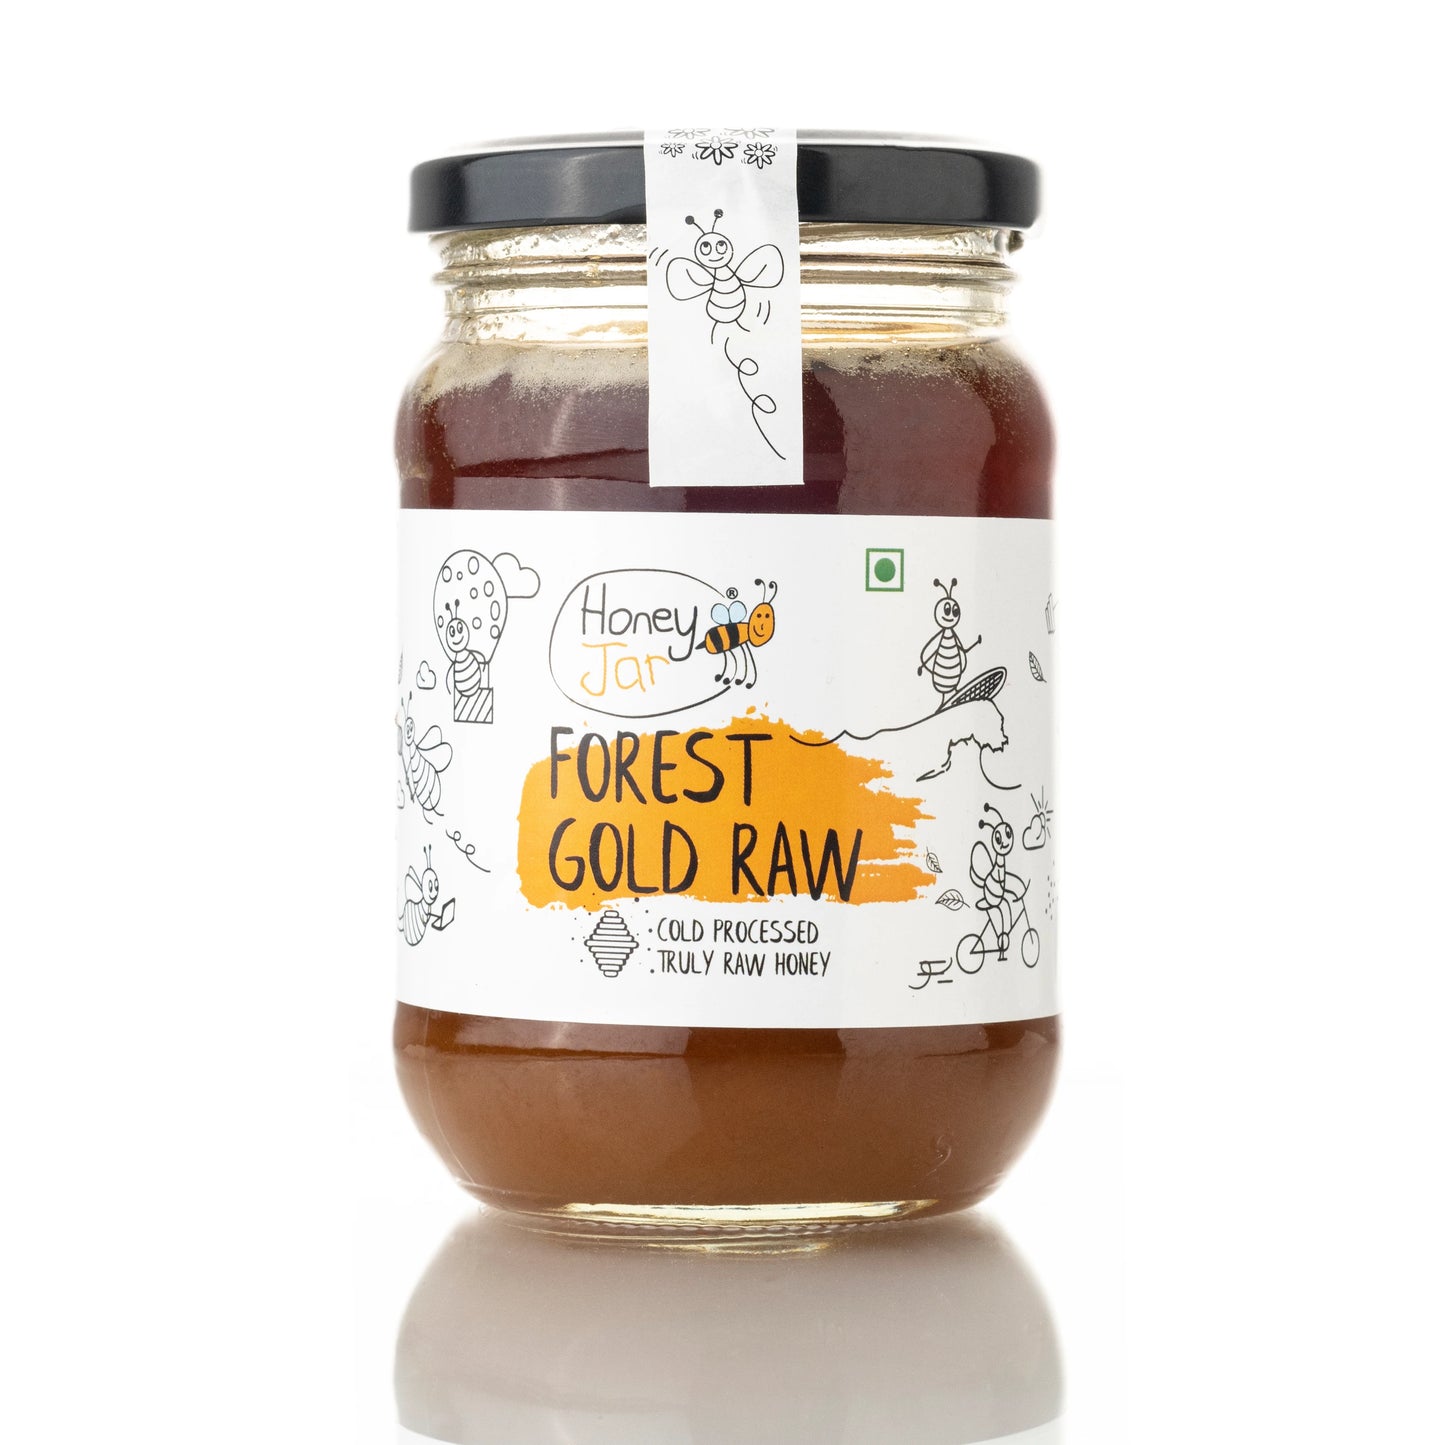 Forest Gold Raw Honey | Pure Honey - NMR Tested